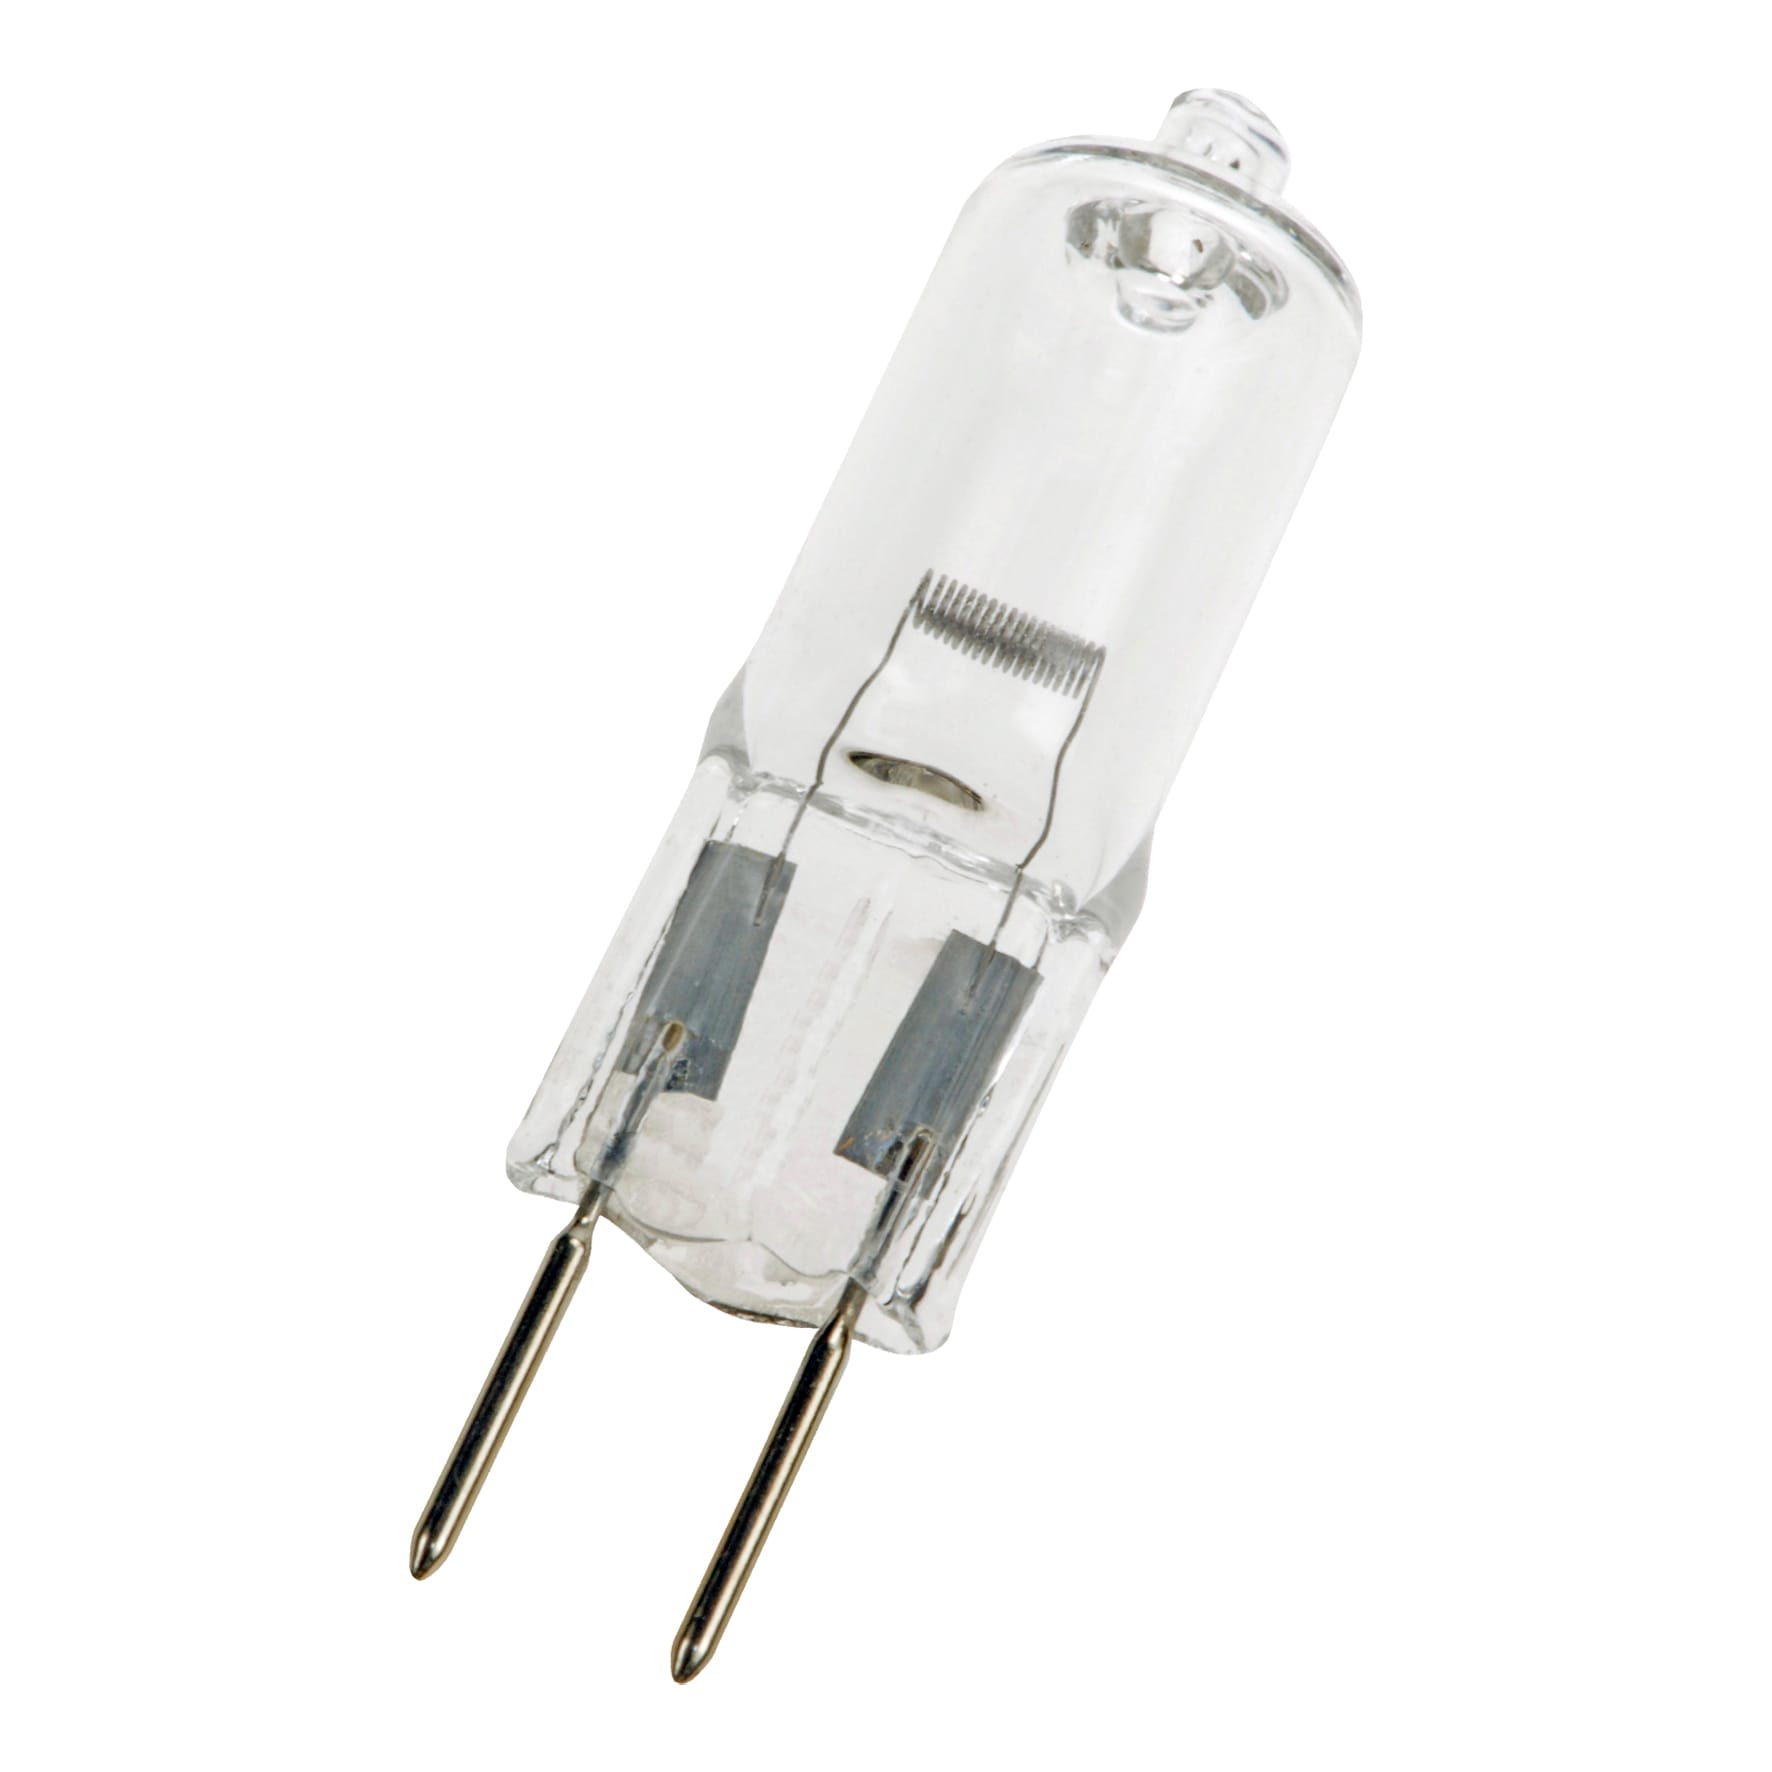 BAILEY - Capsule JC GY6.35 24V 50W Clair 840lm 2000h 10x44mm Lampe halogène basse tension